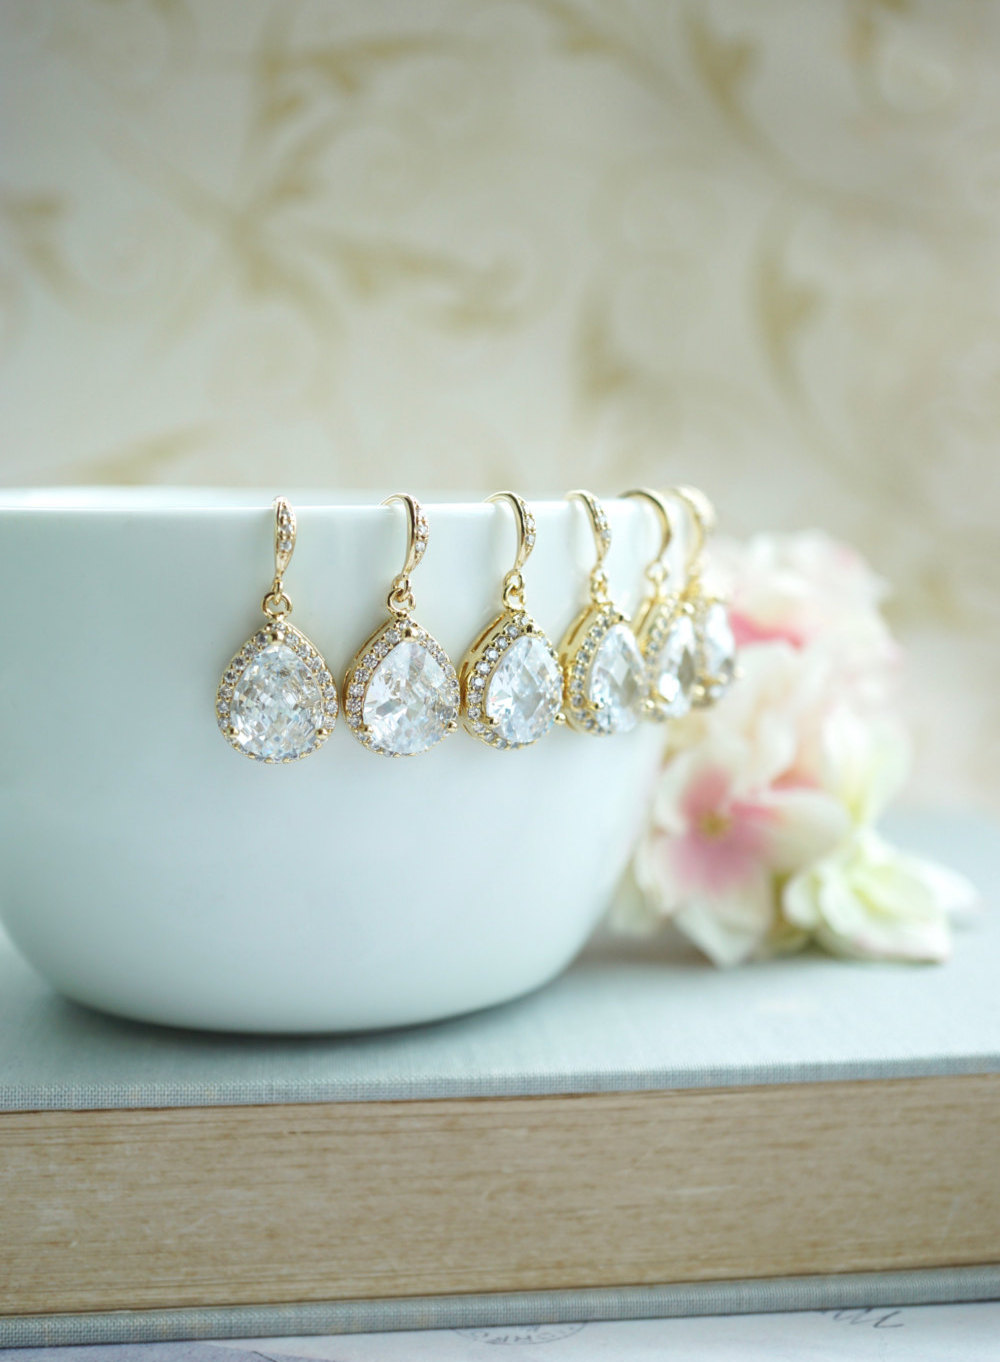 Giveaway: Win free bridal earrings by Marolsha Bridal! Exclusively at EmmalineBride.com